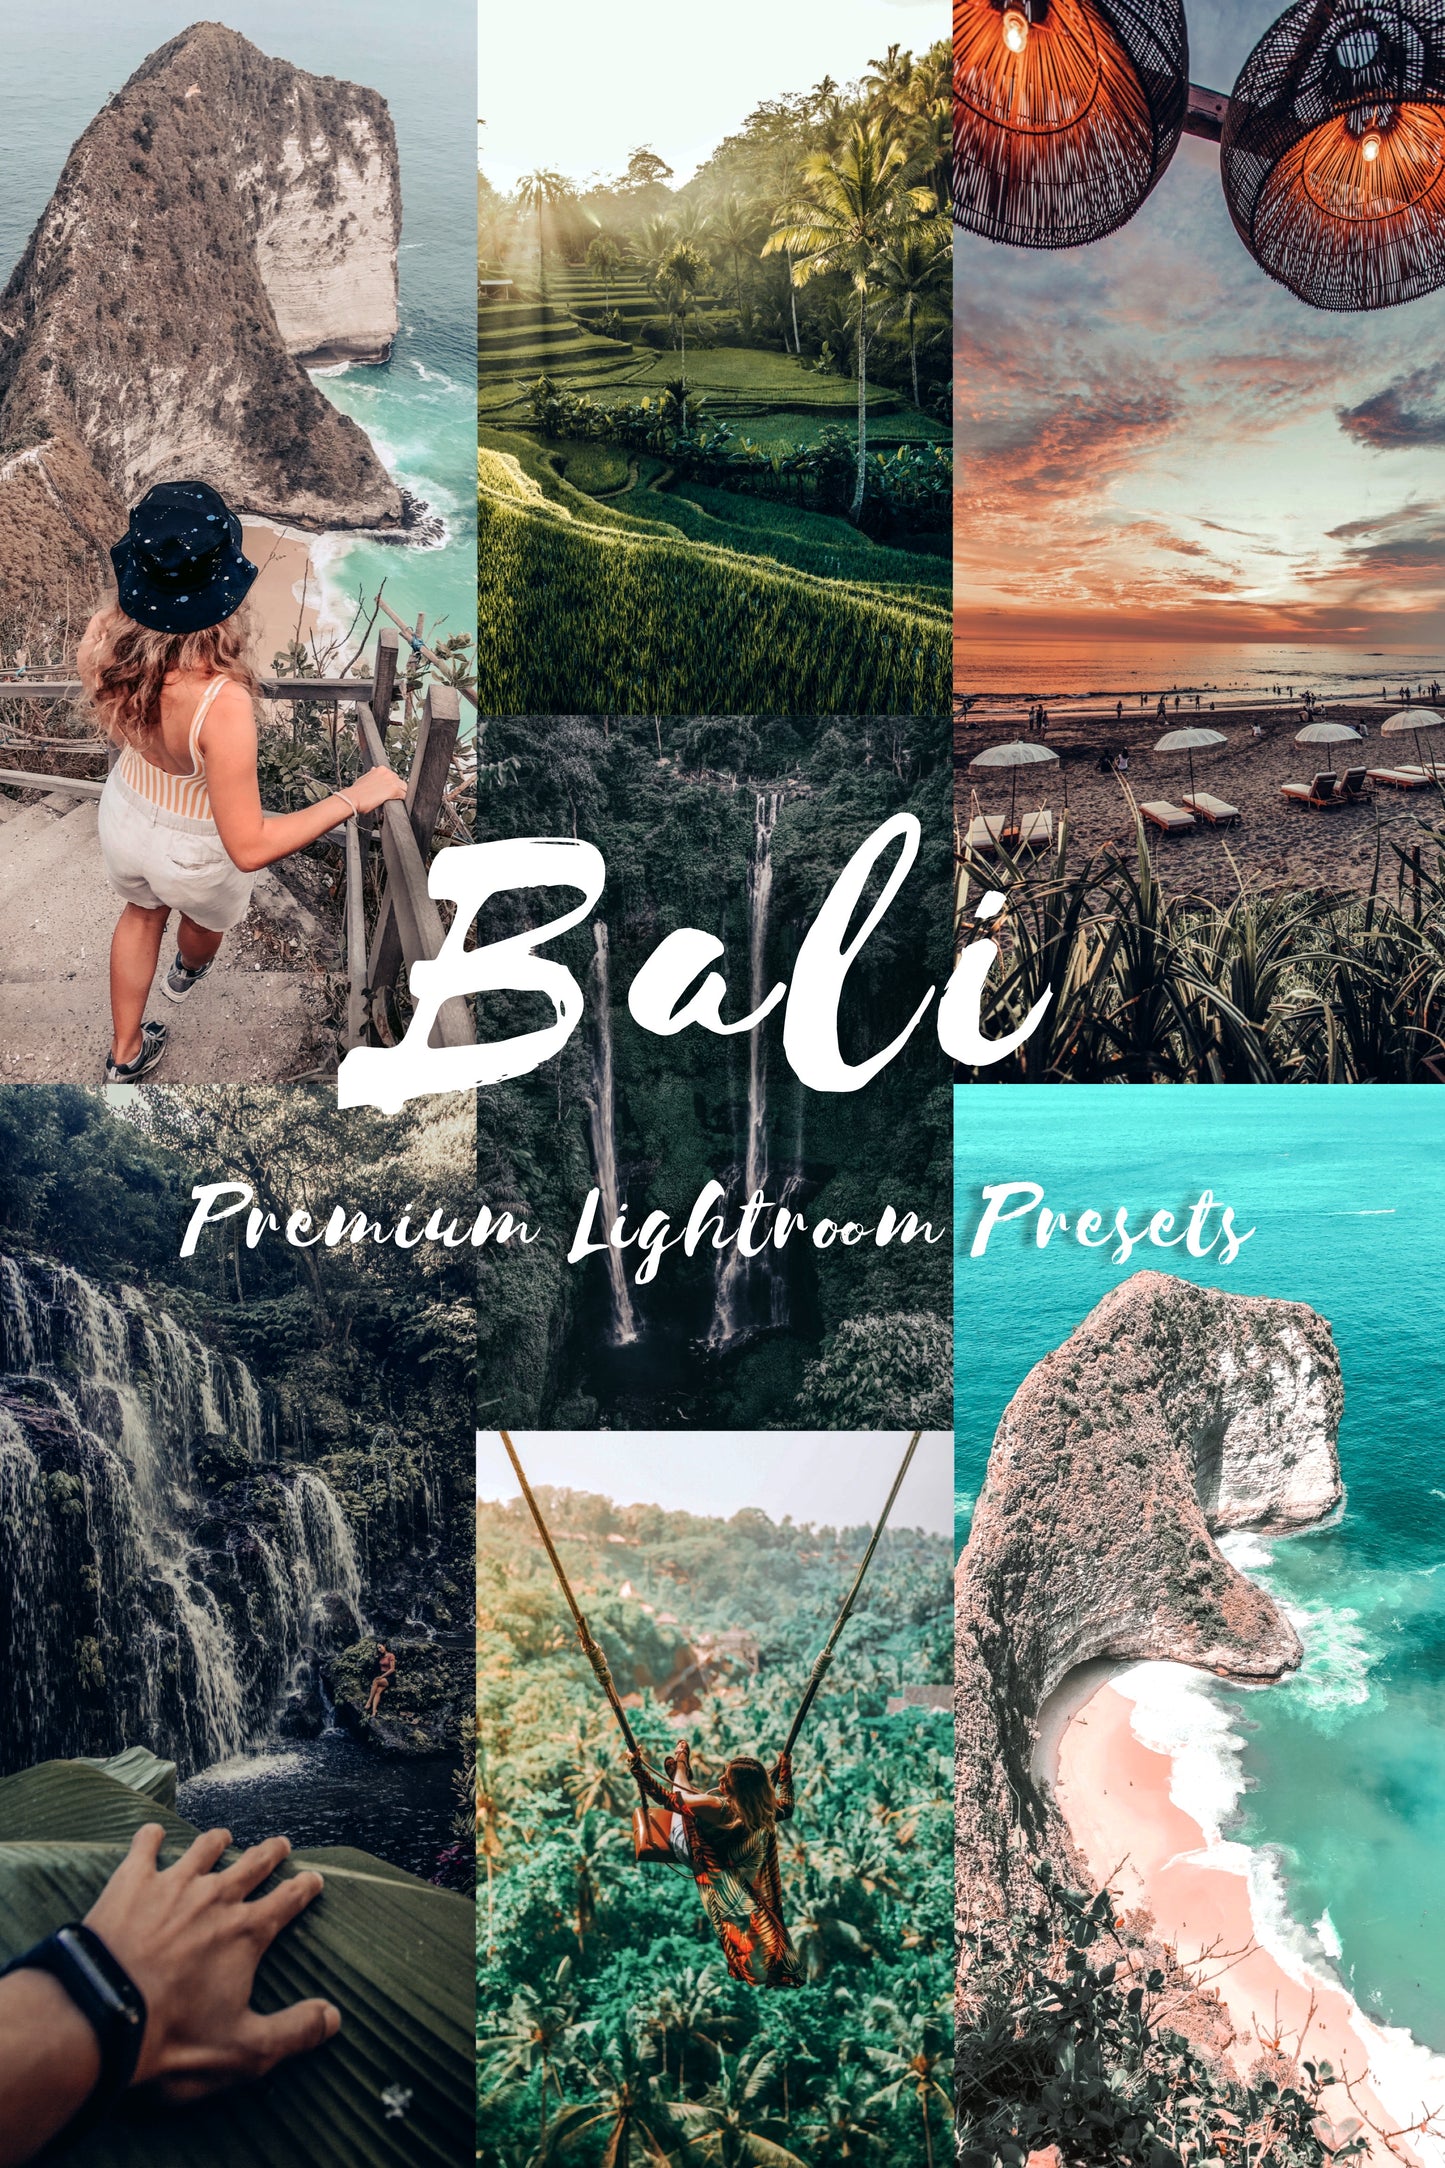 Onliem - Balinese Premium Lightroom Presets are beautiful and effective photo enhancements. Take your photography to the next level, being able to pro edit your images.